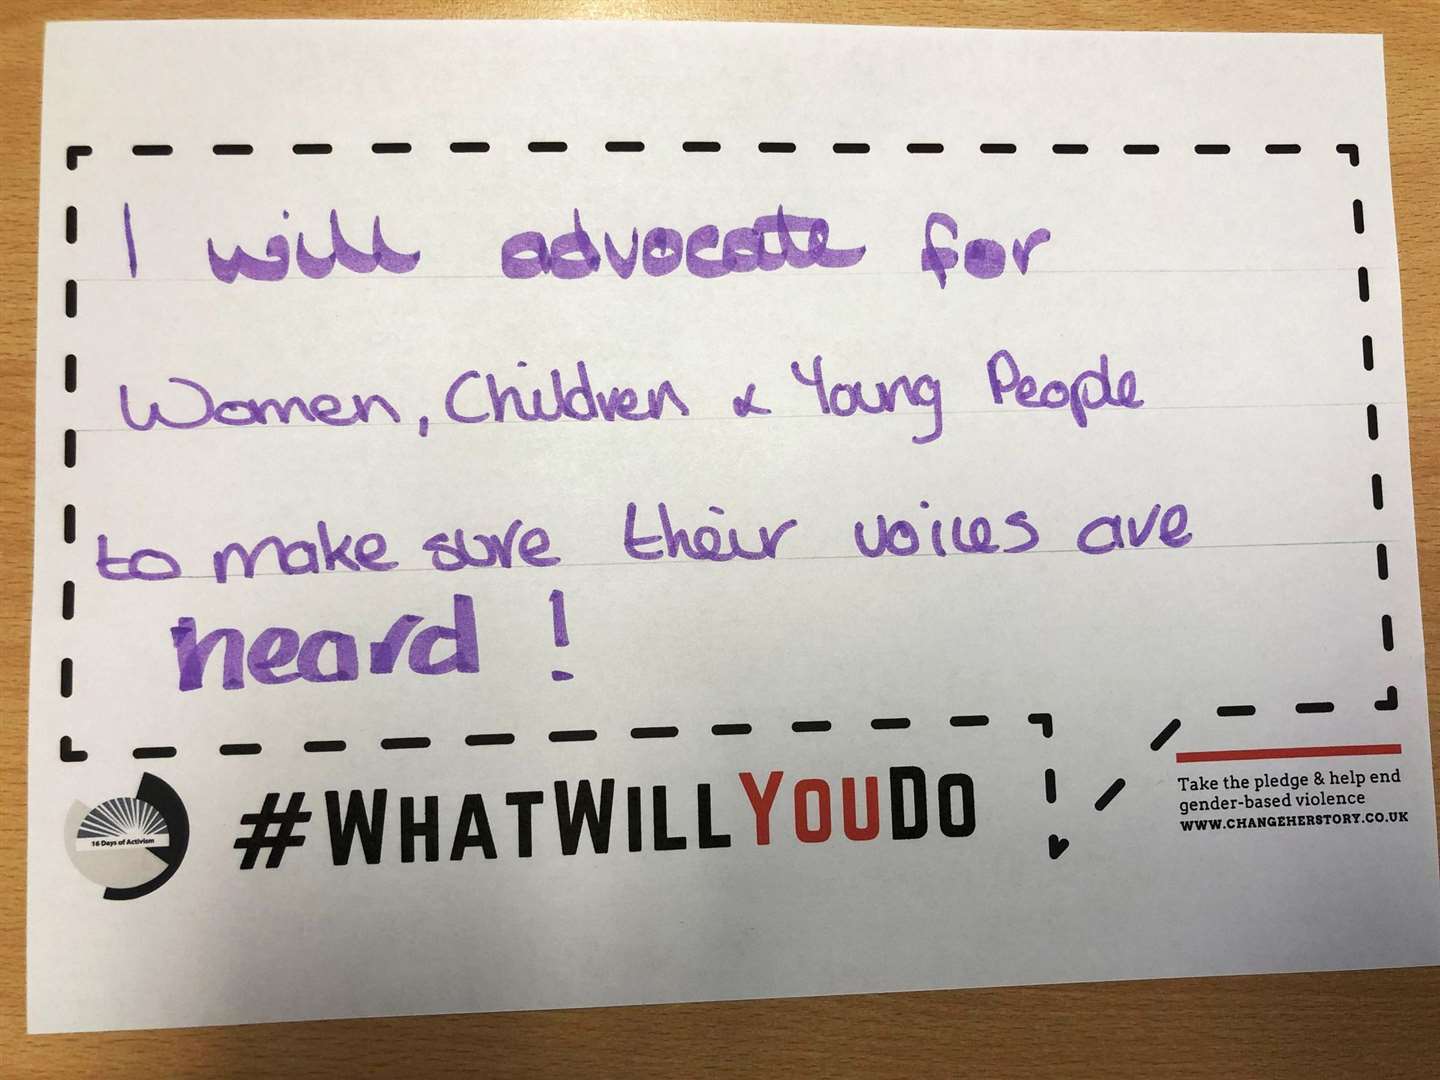 One of the placards from CASWA. Placards can be downloaded from www.changeherstory.co.uk and people are invited to upload them to social media.